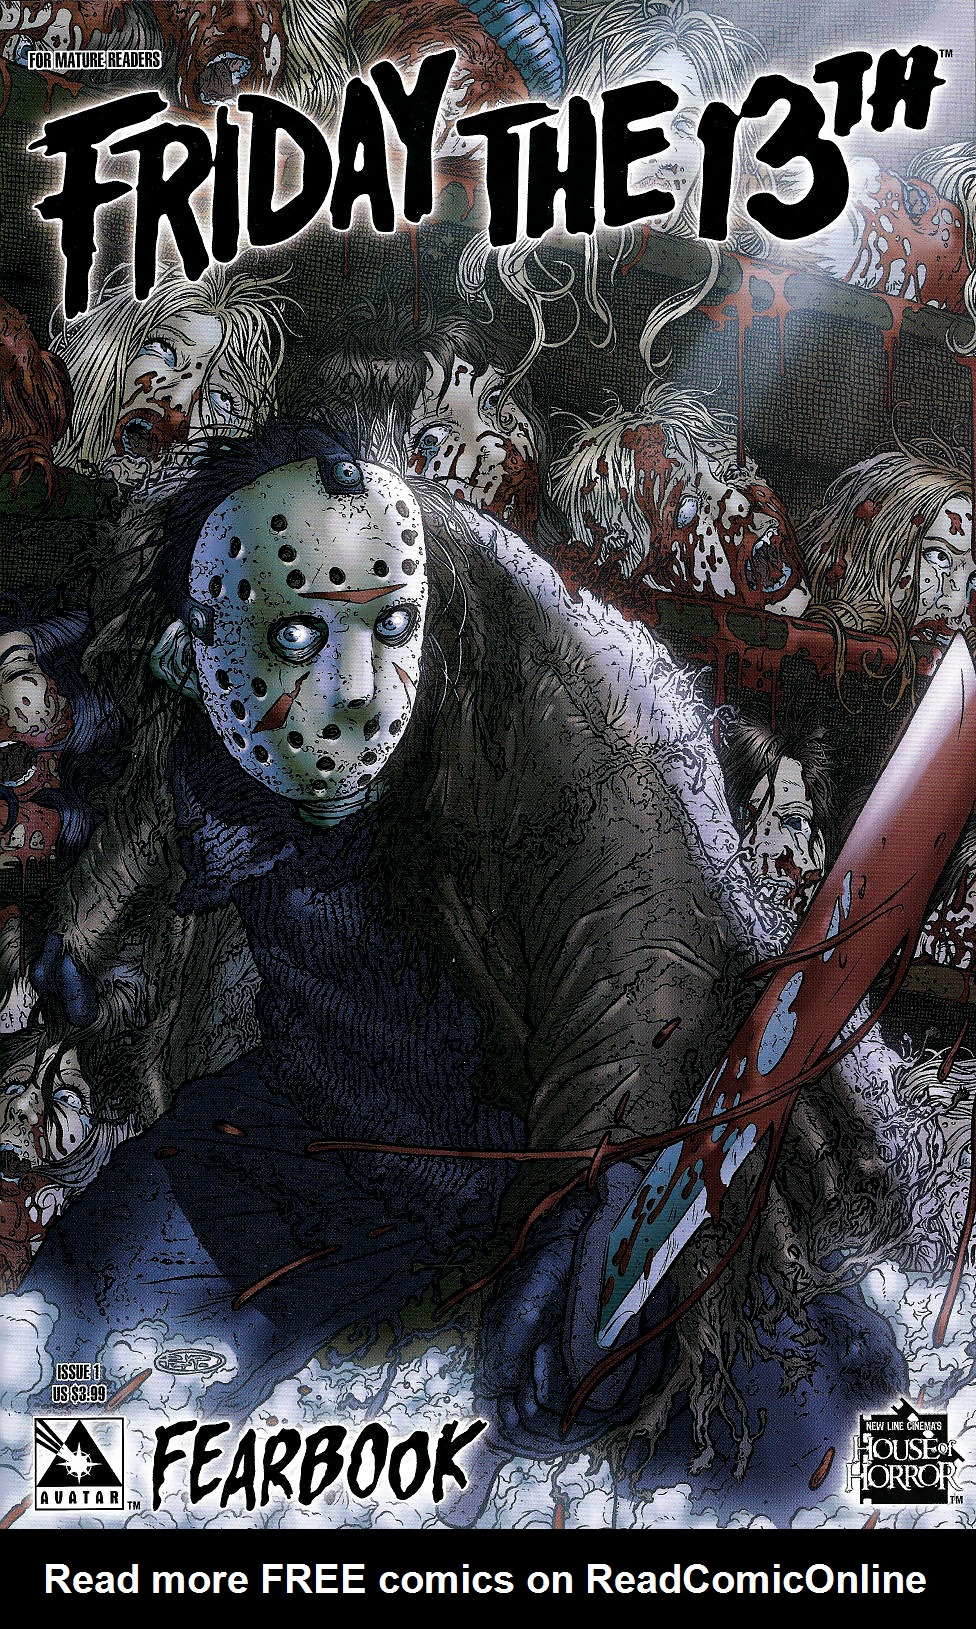 Read online Friday the 13th Fearbook comic -  Issue # Full - 2